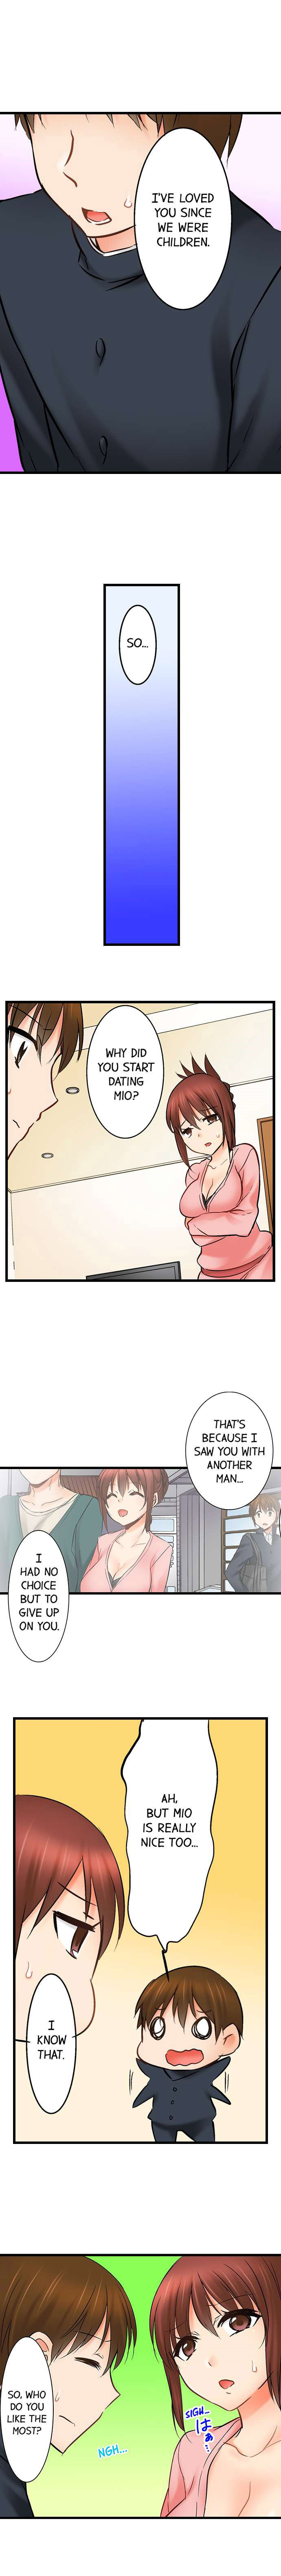 Touching My Older Sister Under the Table - Chapter 21 Page 6